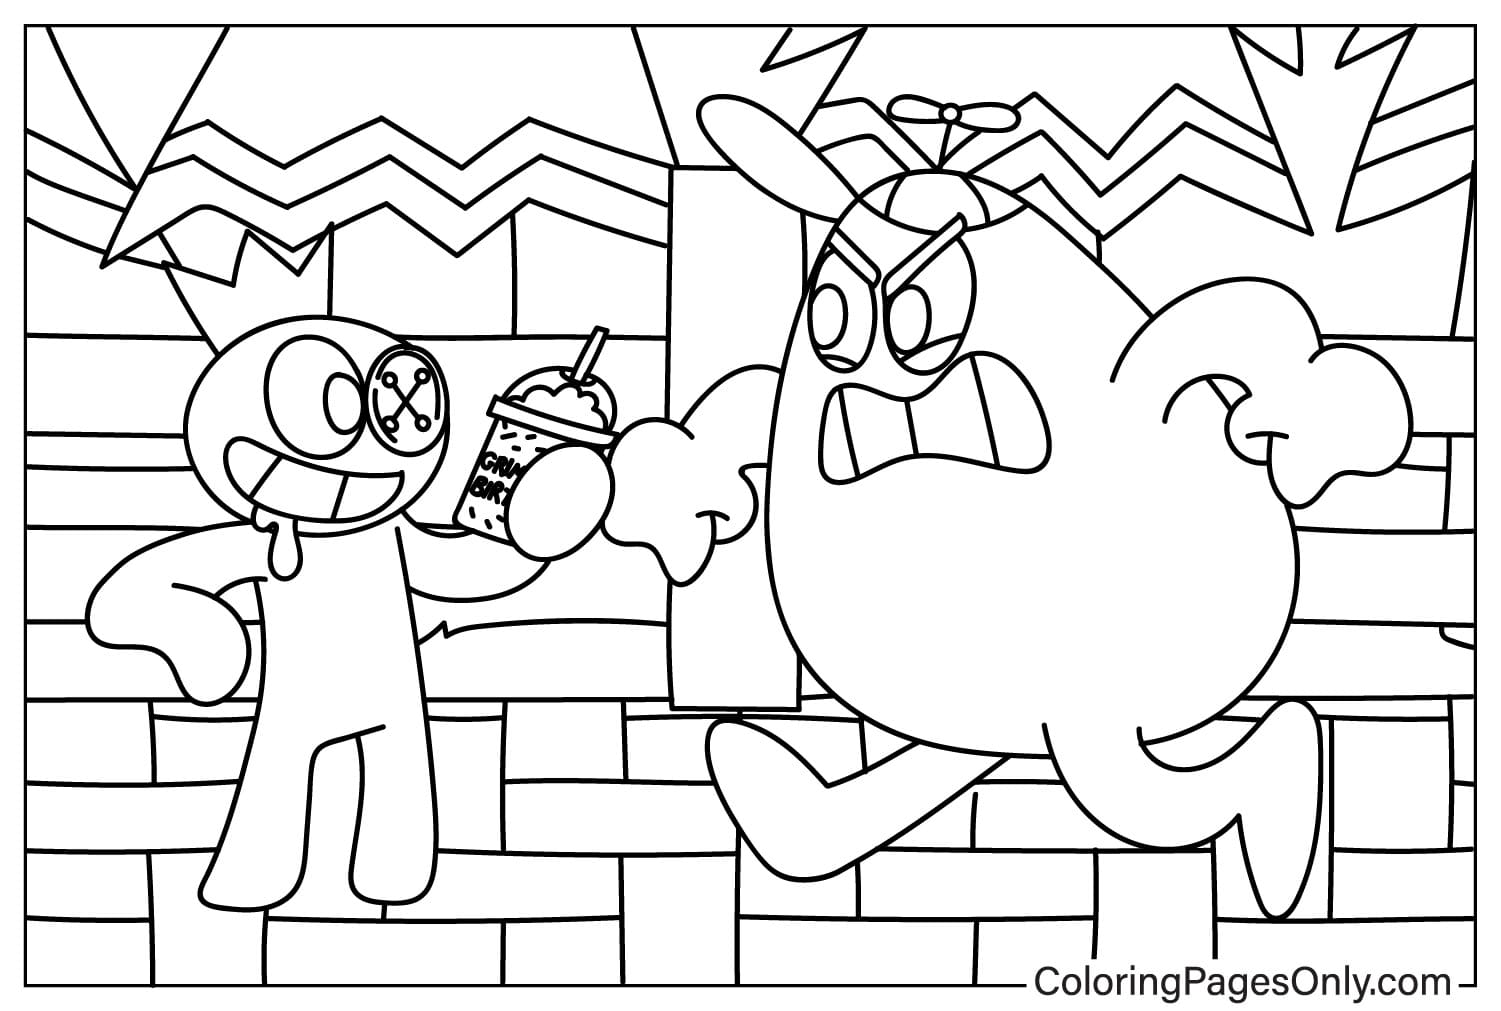 Grimace and Blue Rainbow Coloring Page from Grimace